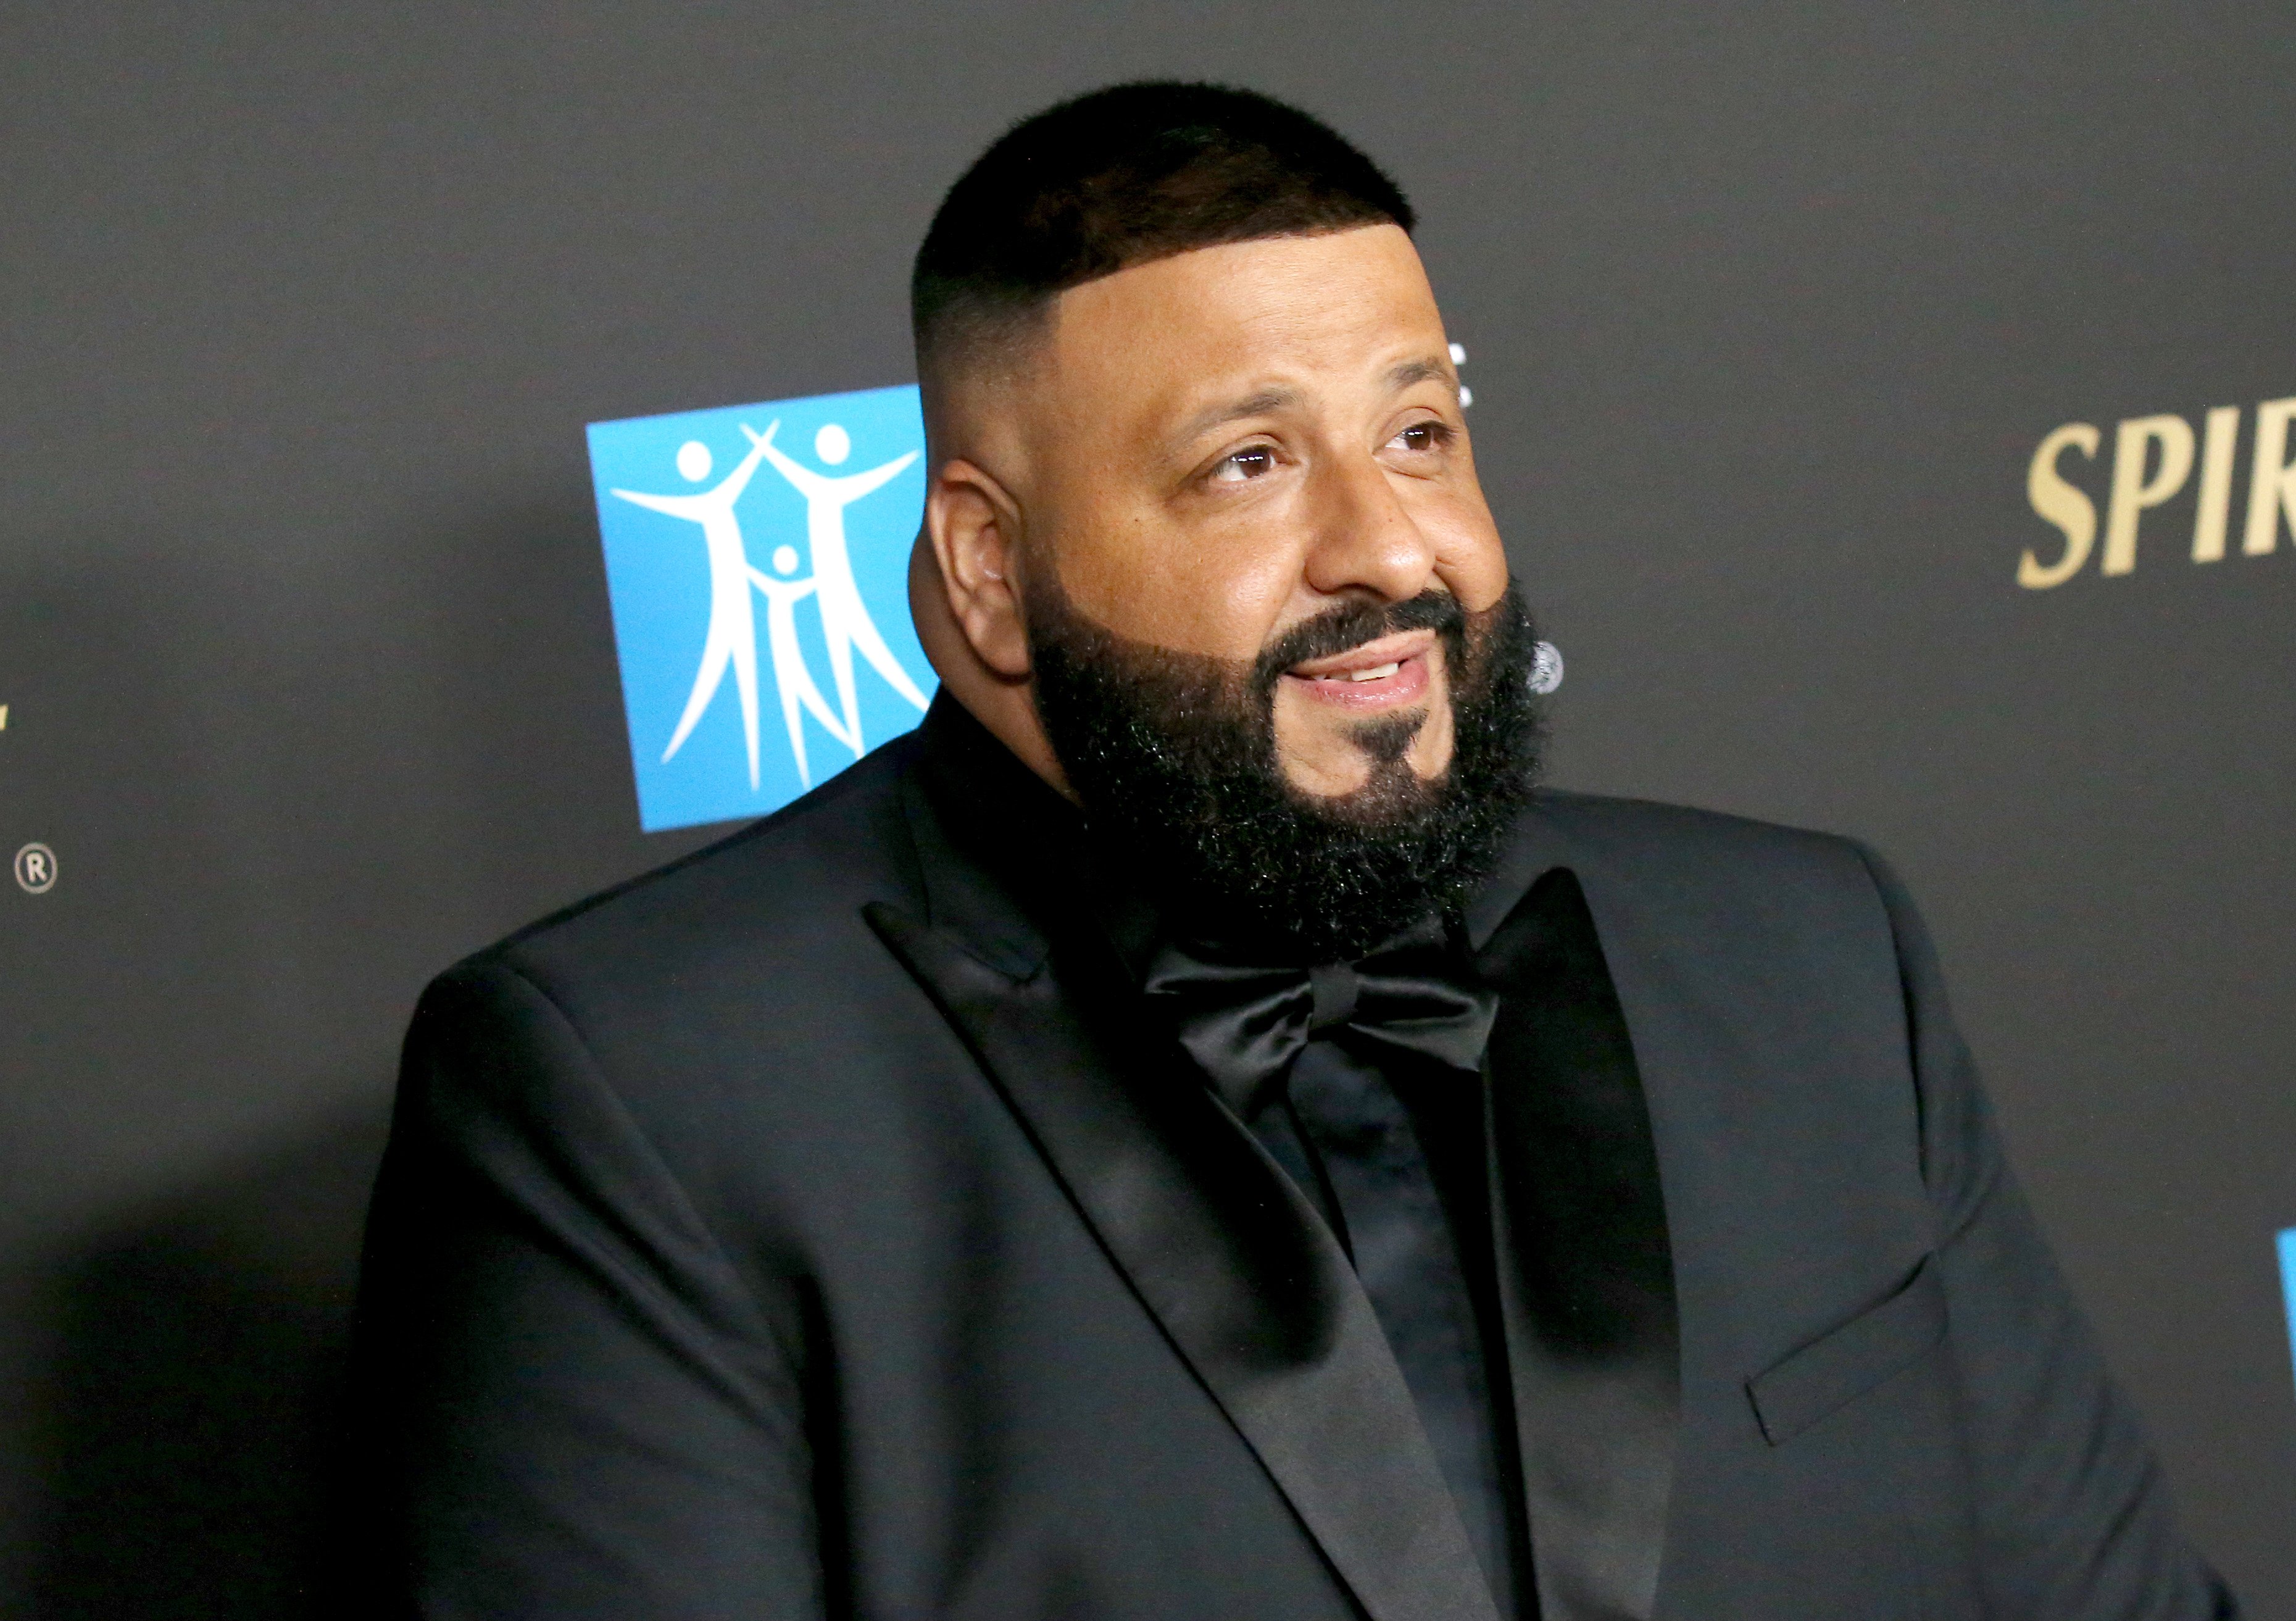 DJ Khaled at the City of Hope's Spirit of Life 2019 Gala on October 10, 2019 in Santa Monica, California. | Source: Getty Images